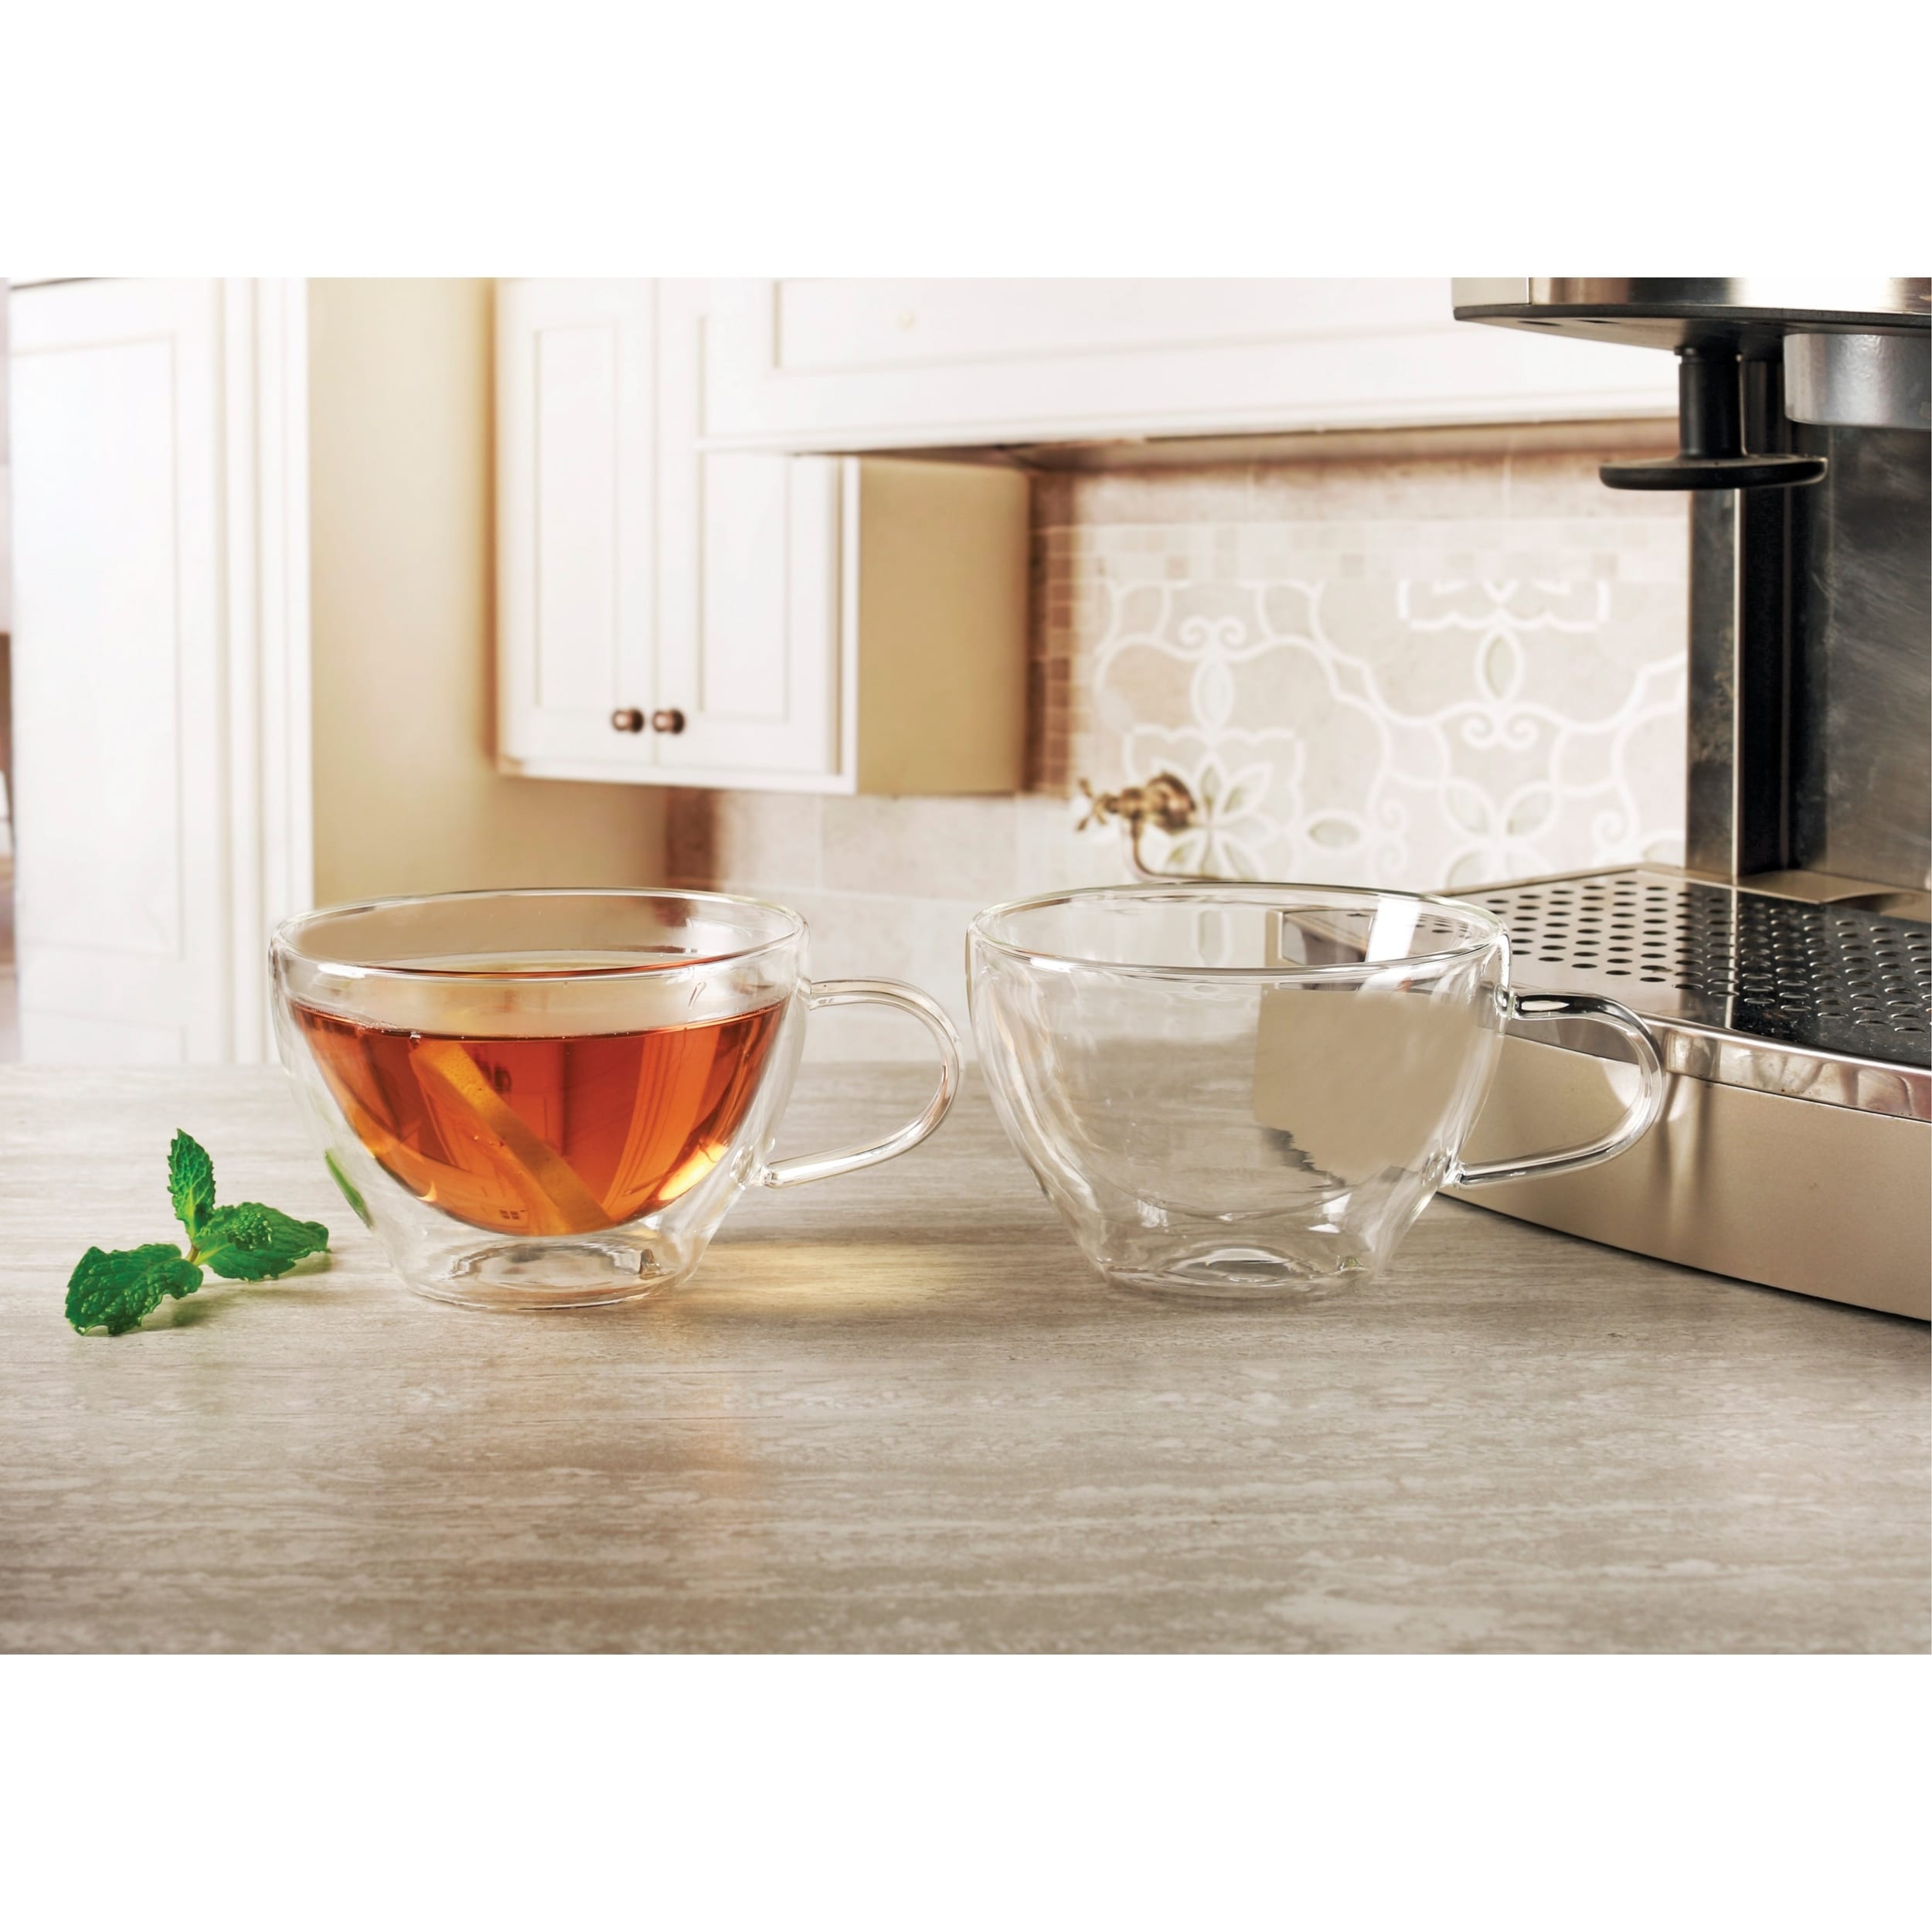 https://ak1.ostkcdn.com/images/products/31128121/Thermax-Set-of-2-8-Oz.-Double-Wall-Insulated-Glass-Coffee-Tea-Cup-8-oz-b3a9db9a-0a36-4713-b0ce-acafa61ab822.jpg